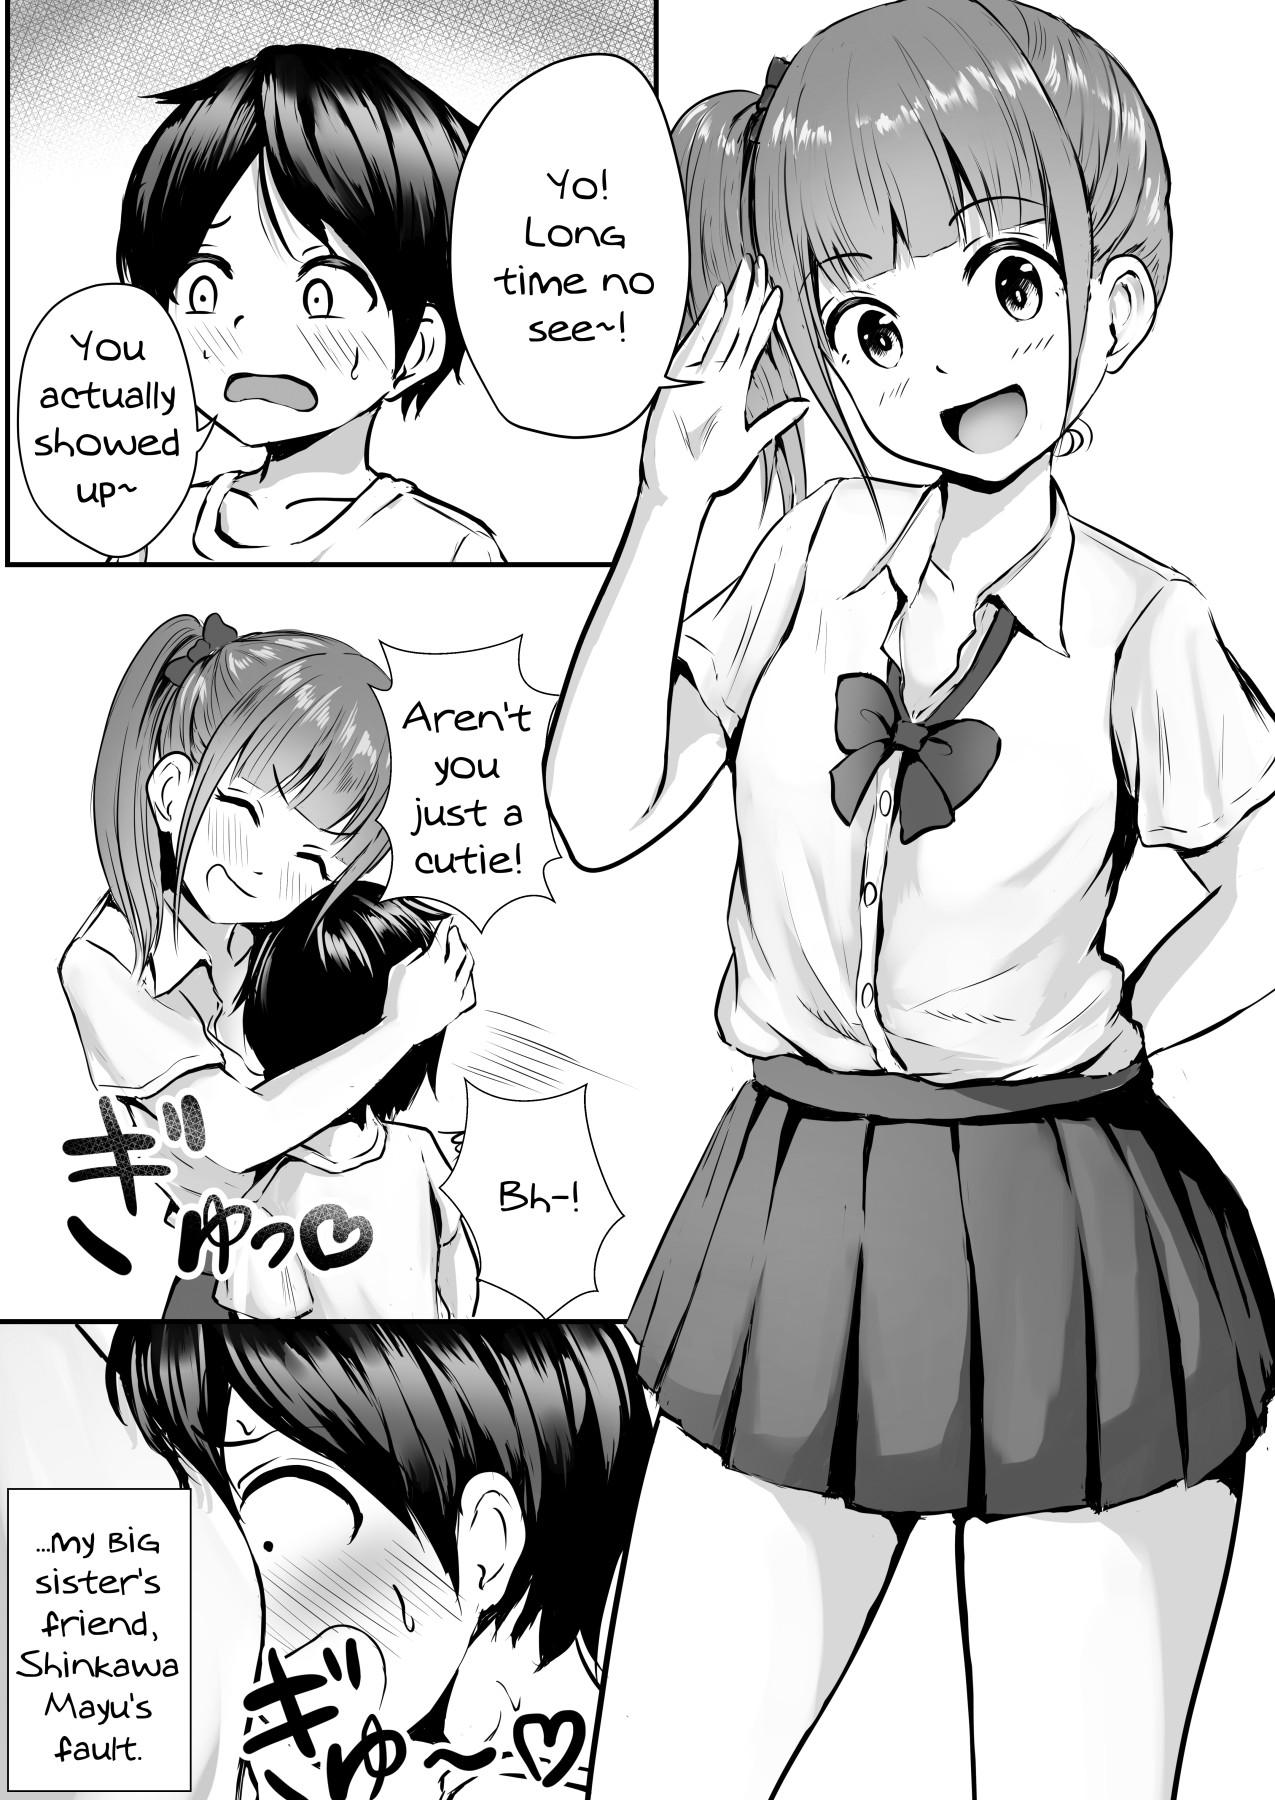 Argentino Ane no Shinyuu to Ikaseai | Getting Lewd With My Sister's Best Friend - Original Tribbing - Page 3